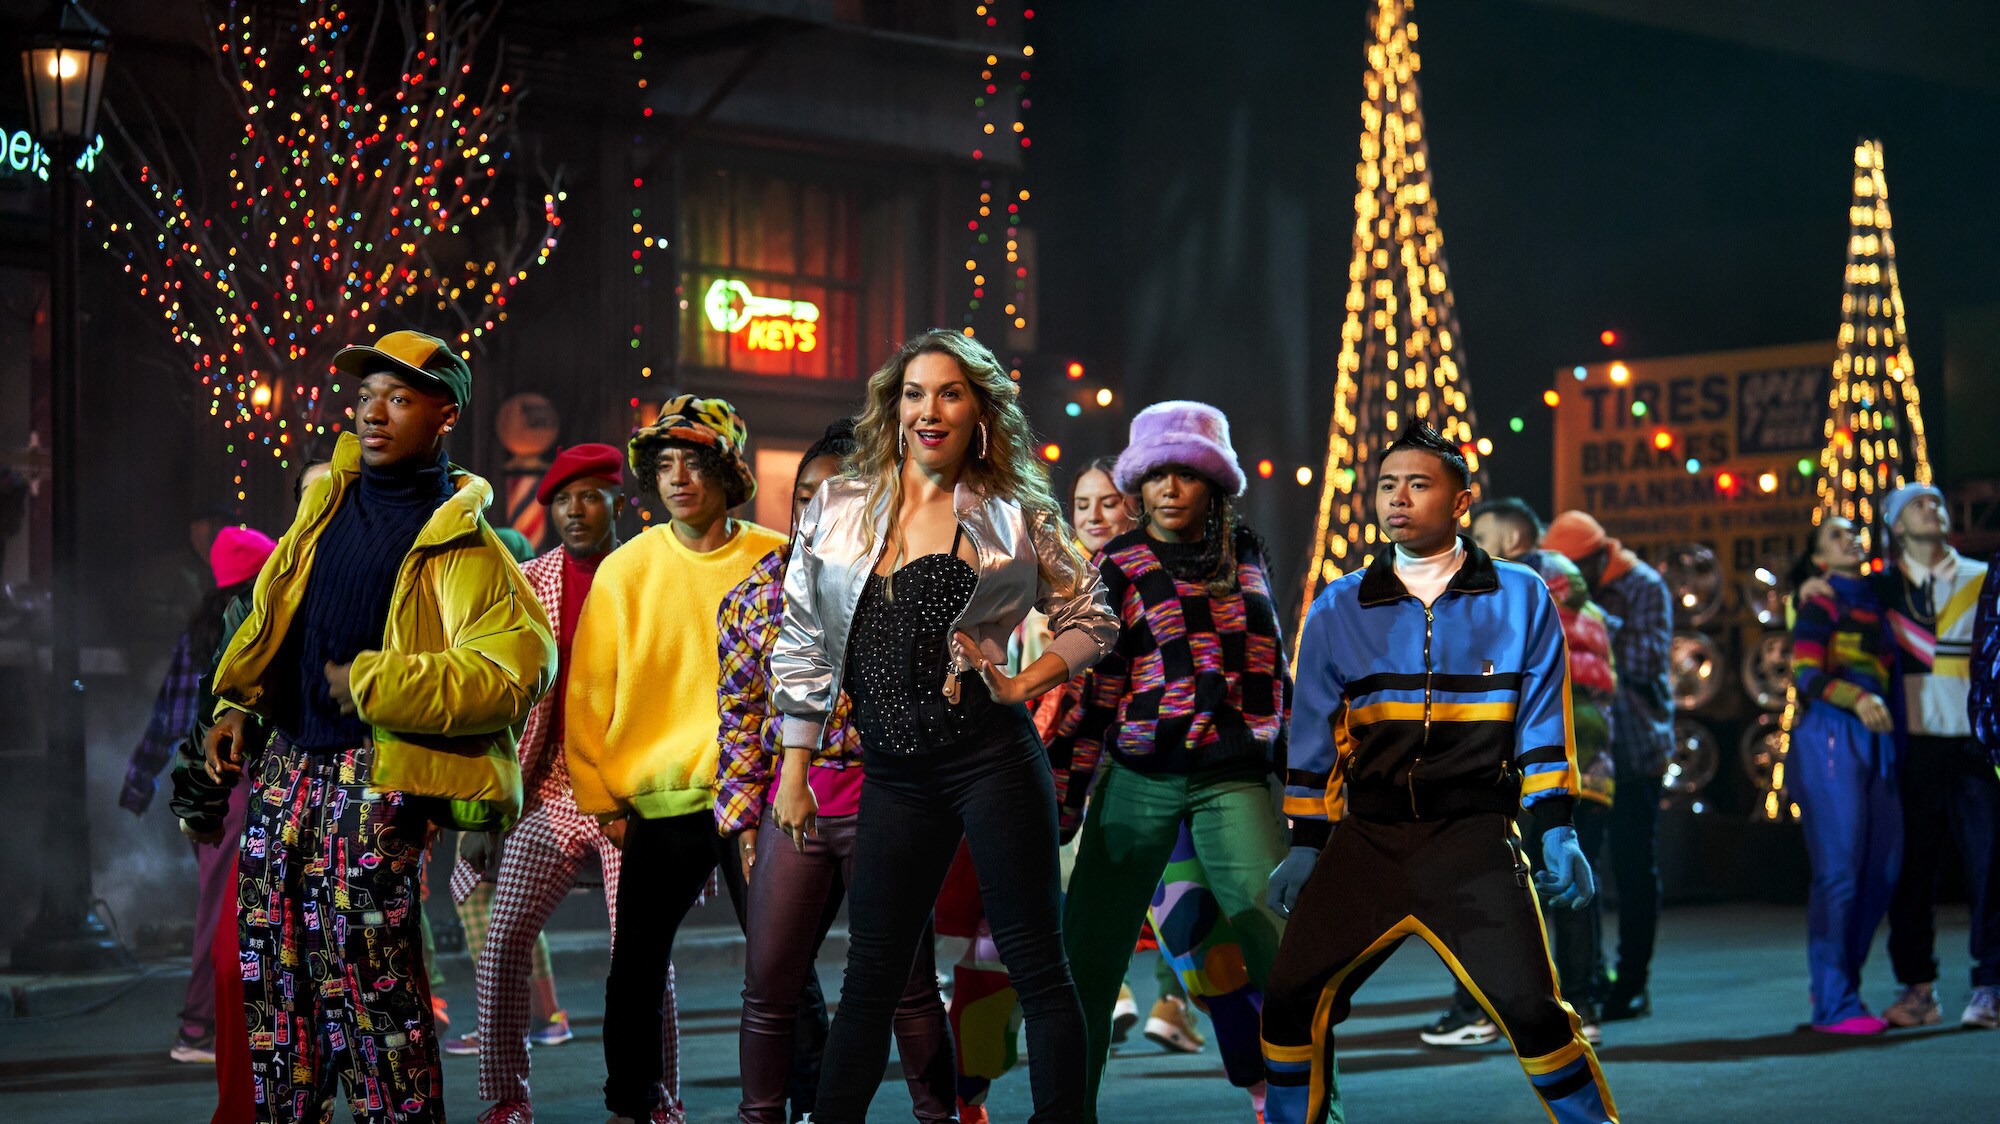 Mom, played by Allison Holker Boss (center), dances with ensemble members at the block party in Disney's The Hip Hop Nutcracker. (Photo credit: Disney/Ser Baffo)